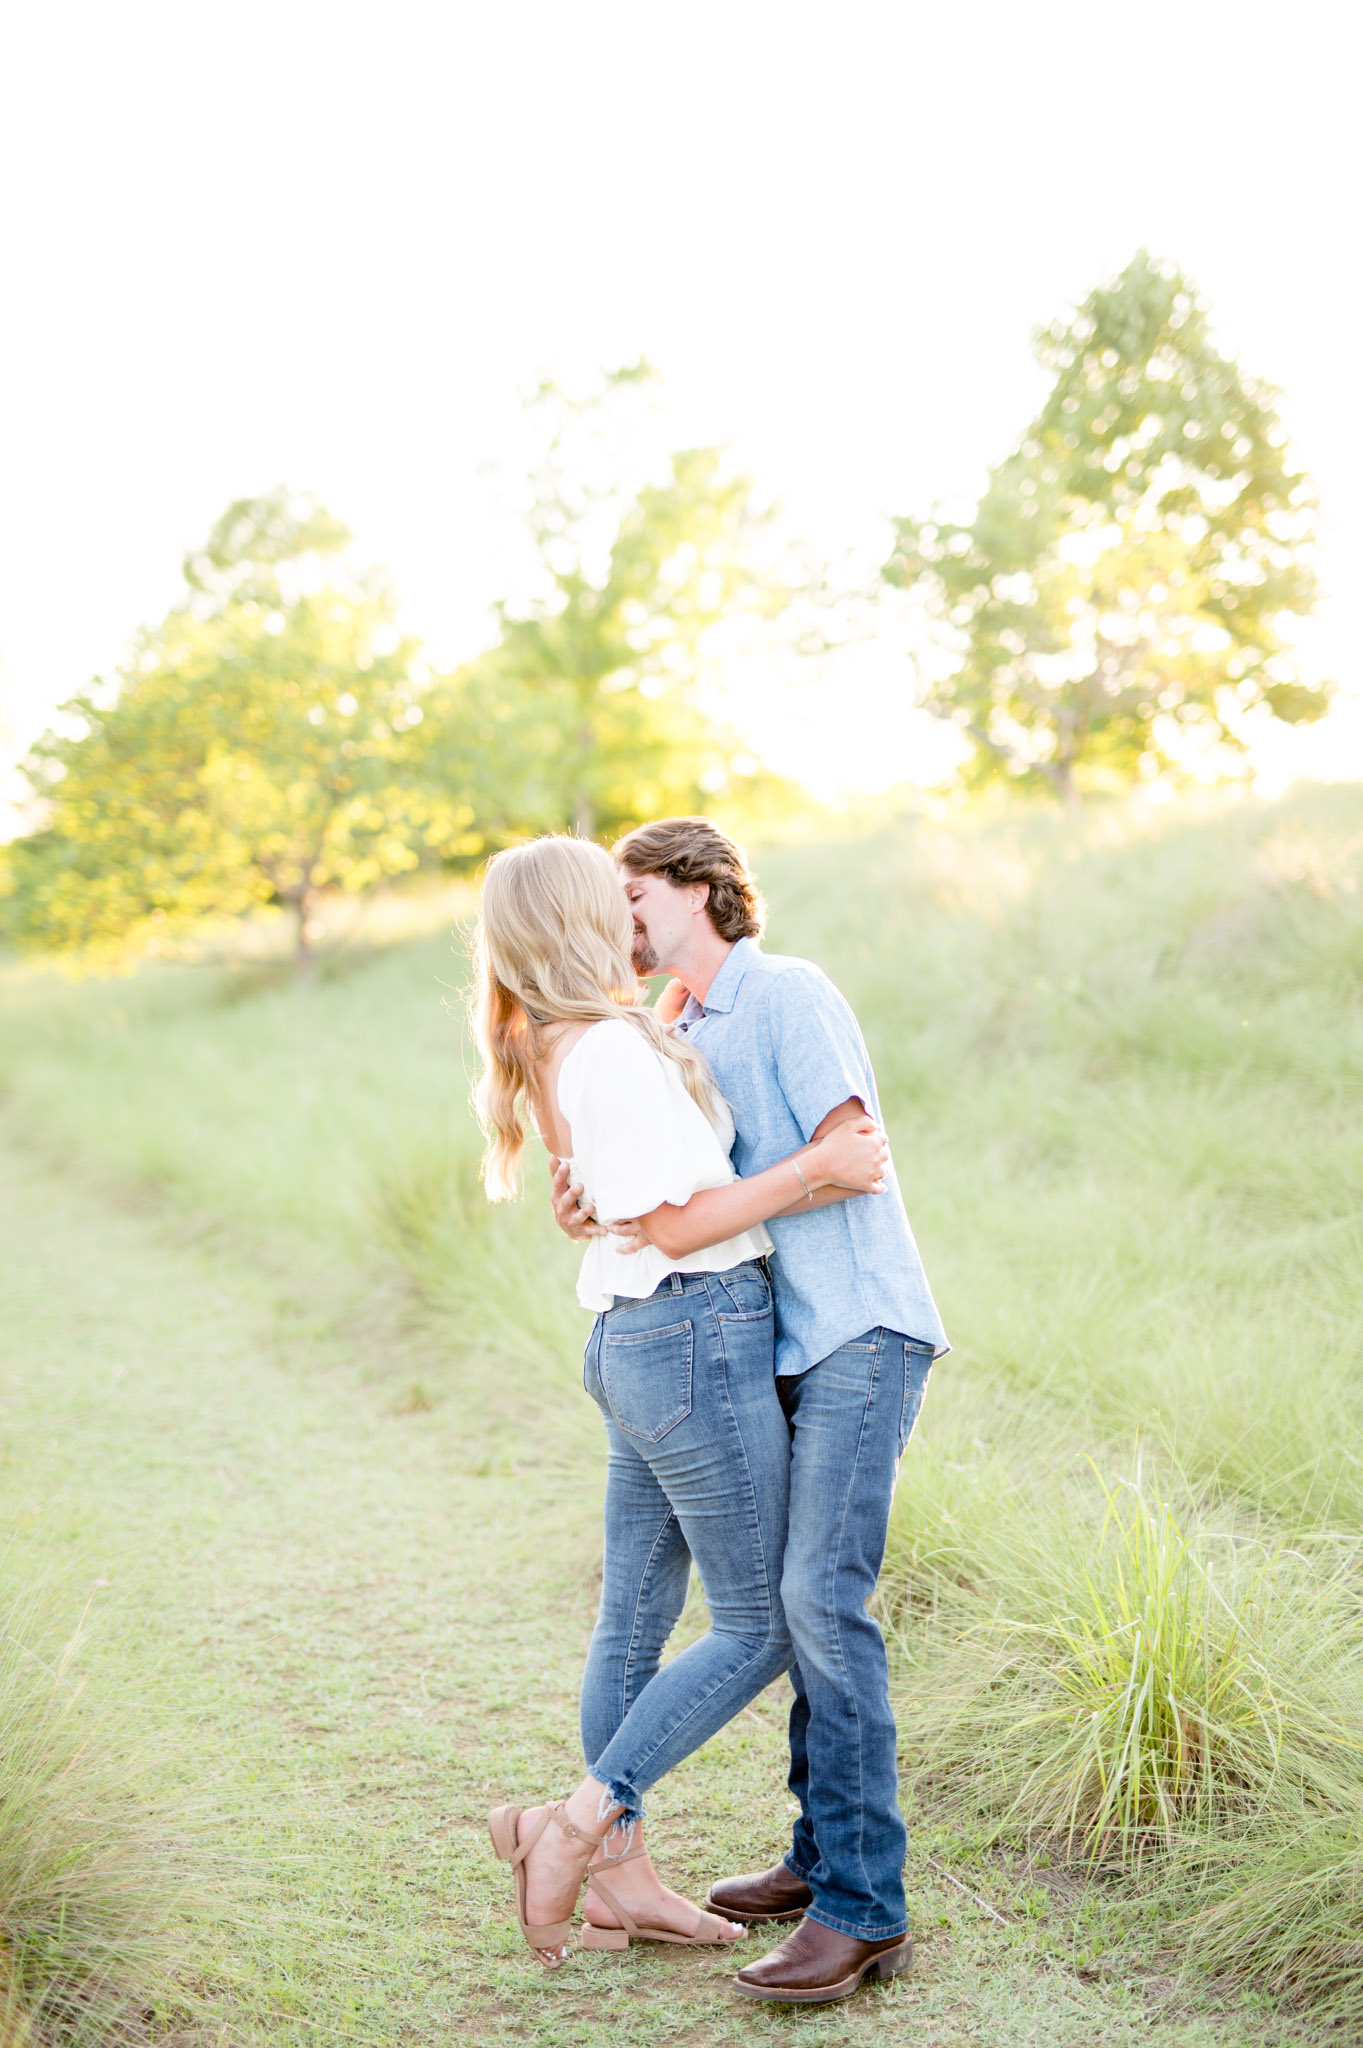 Engaged couple kiss in field at sunset.